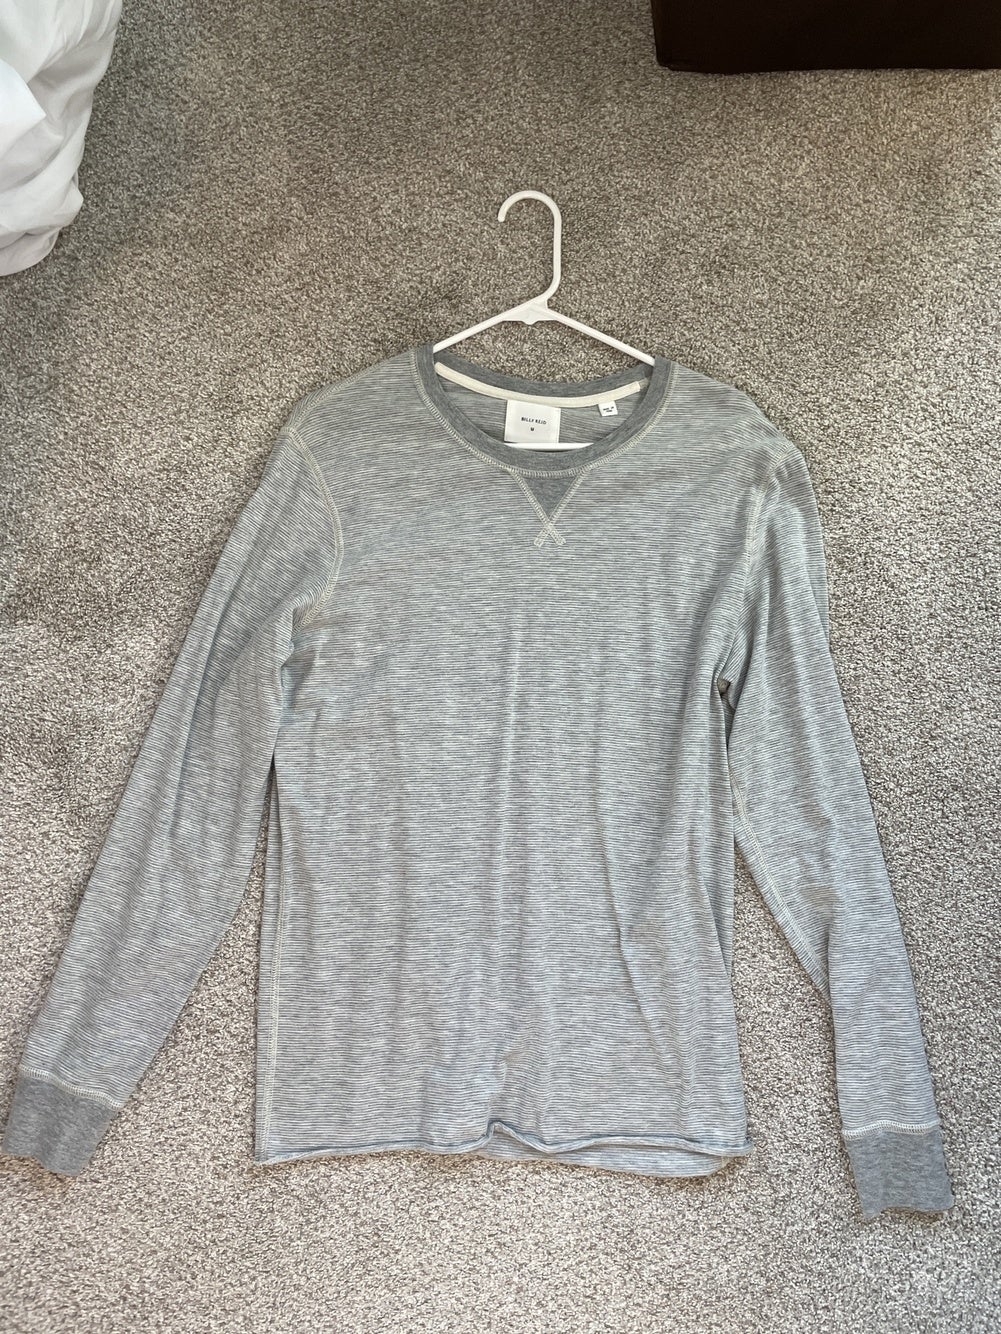 Urban Outfitters Long Sleeve Shirt | SidelineSwap